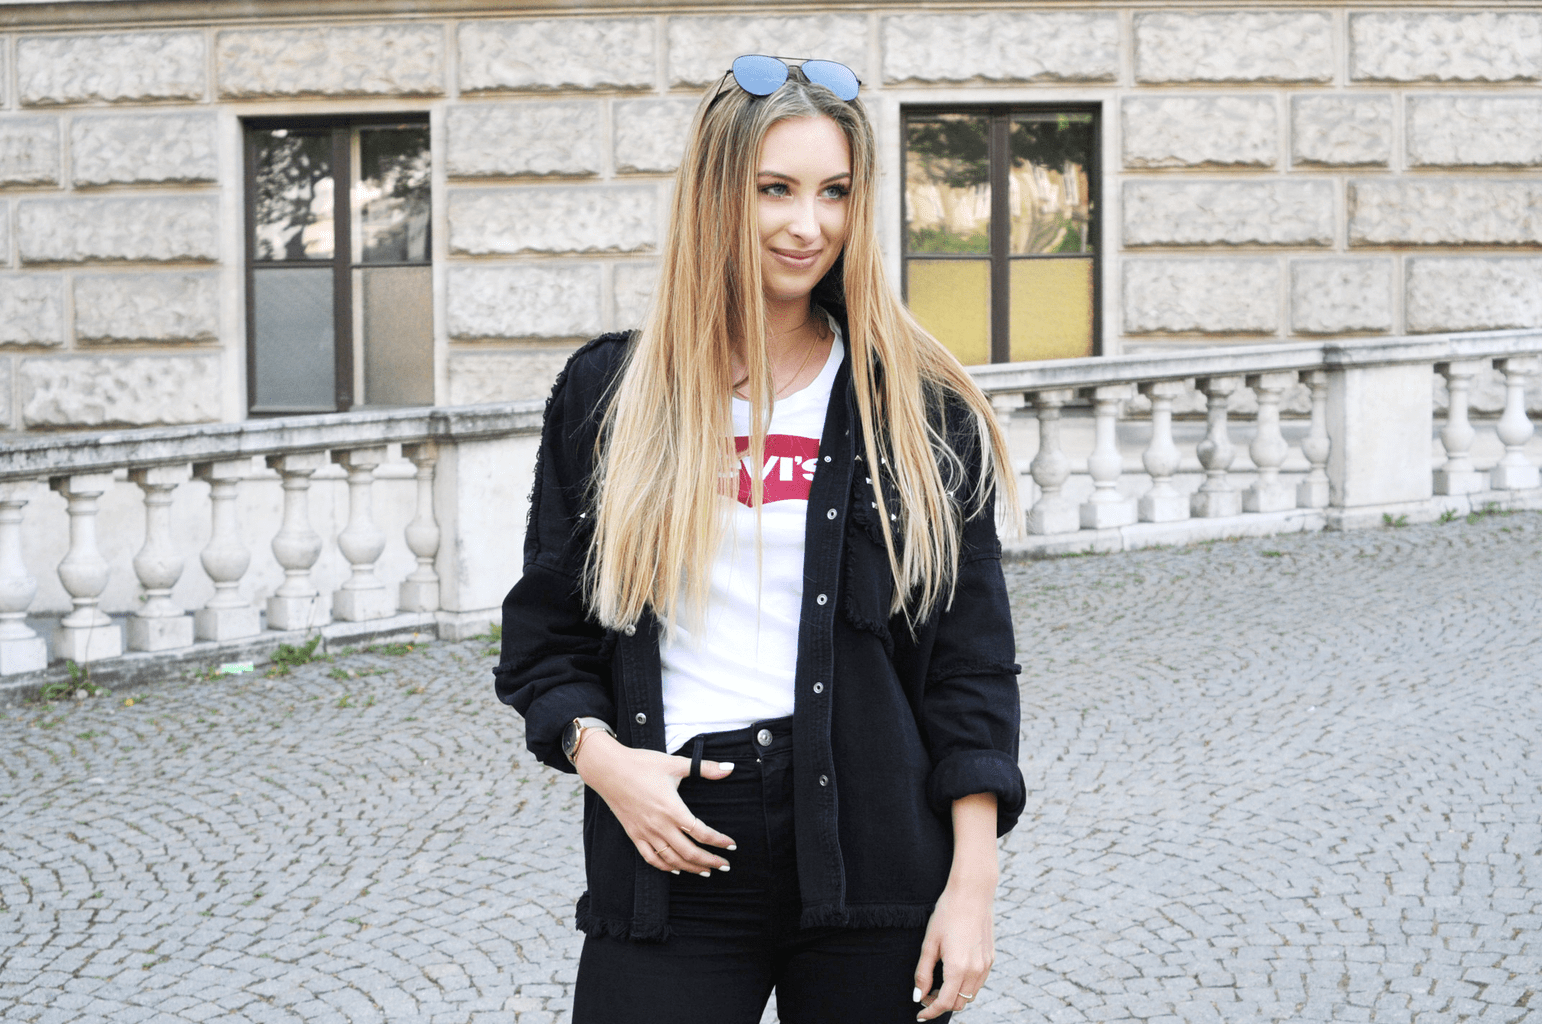 Fashion on campus at the University of Austria - student Anika wears skinny black jeans, an oversized black button down shirt, a white Levi's tee shirt, and aviator sunglasses